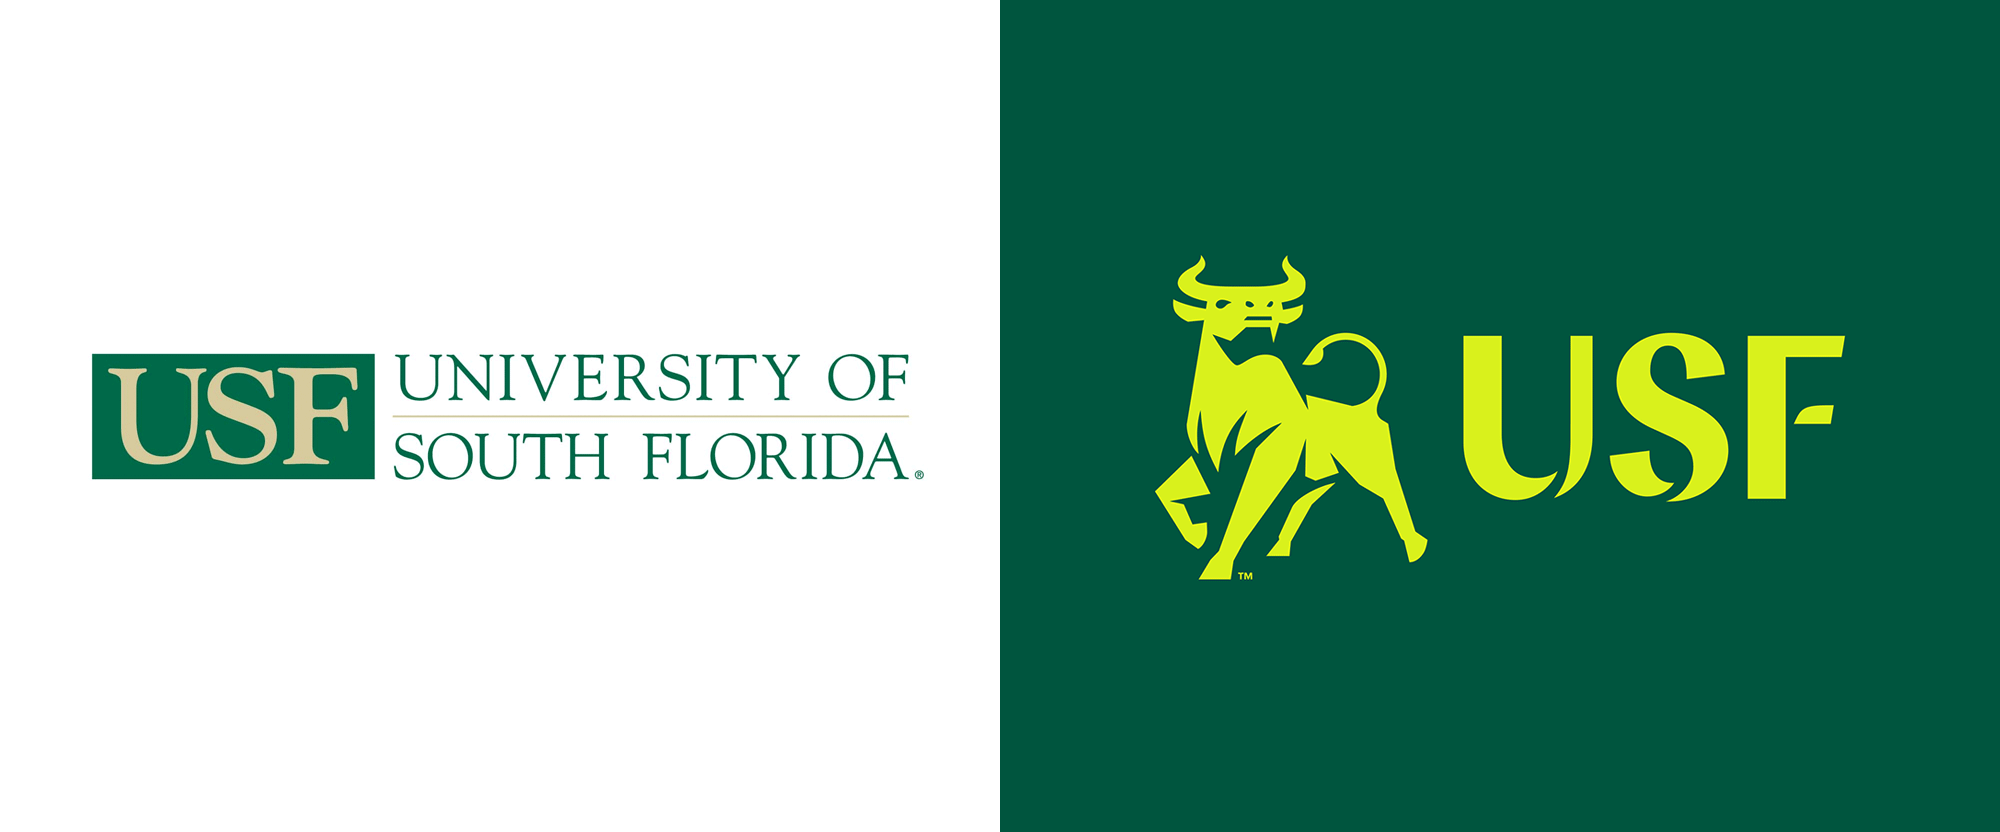 USF Logo - Brand New: New Logo and Identity for University of South Florida by ...